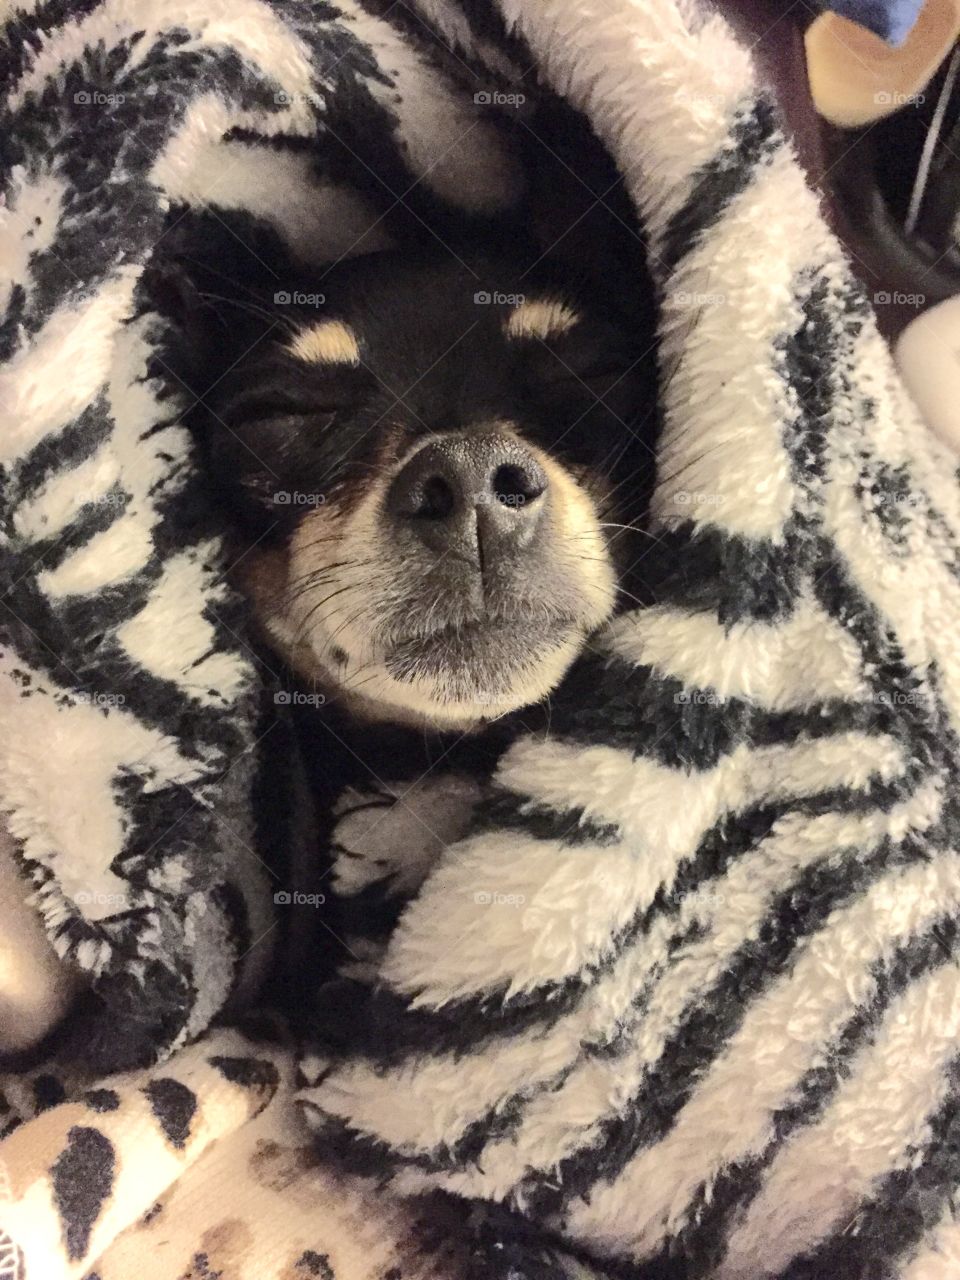 This is Pixie the chihuahua all bundled up in her favorite zebra blanket. 